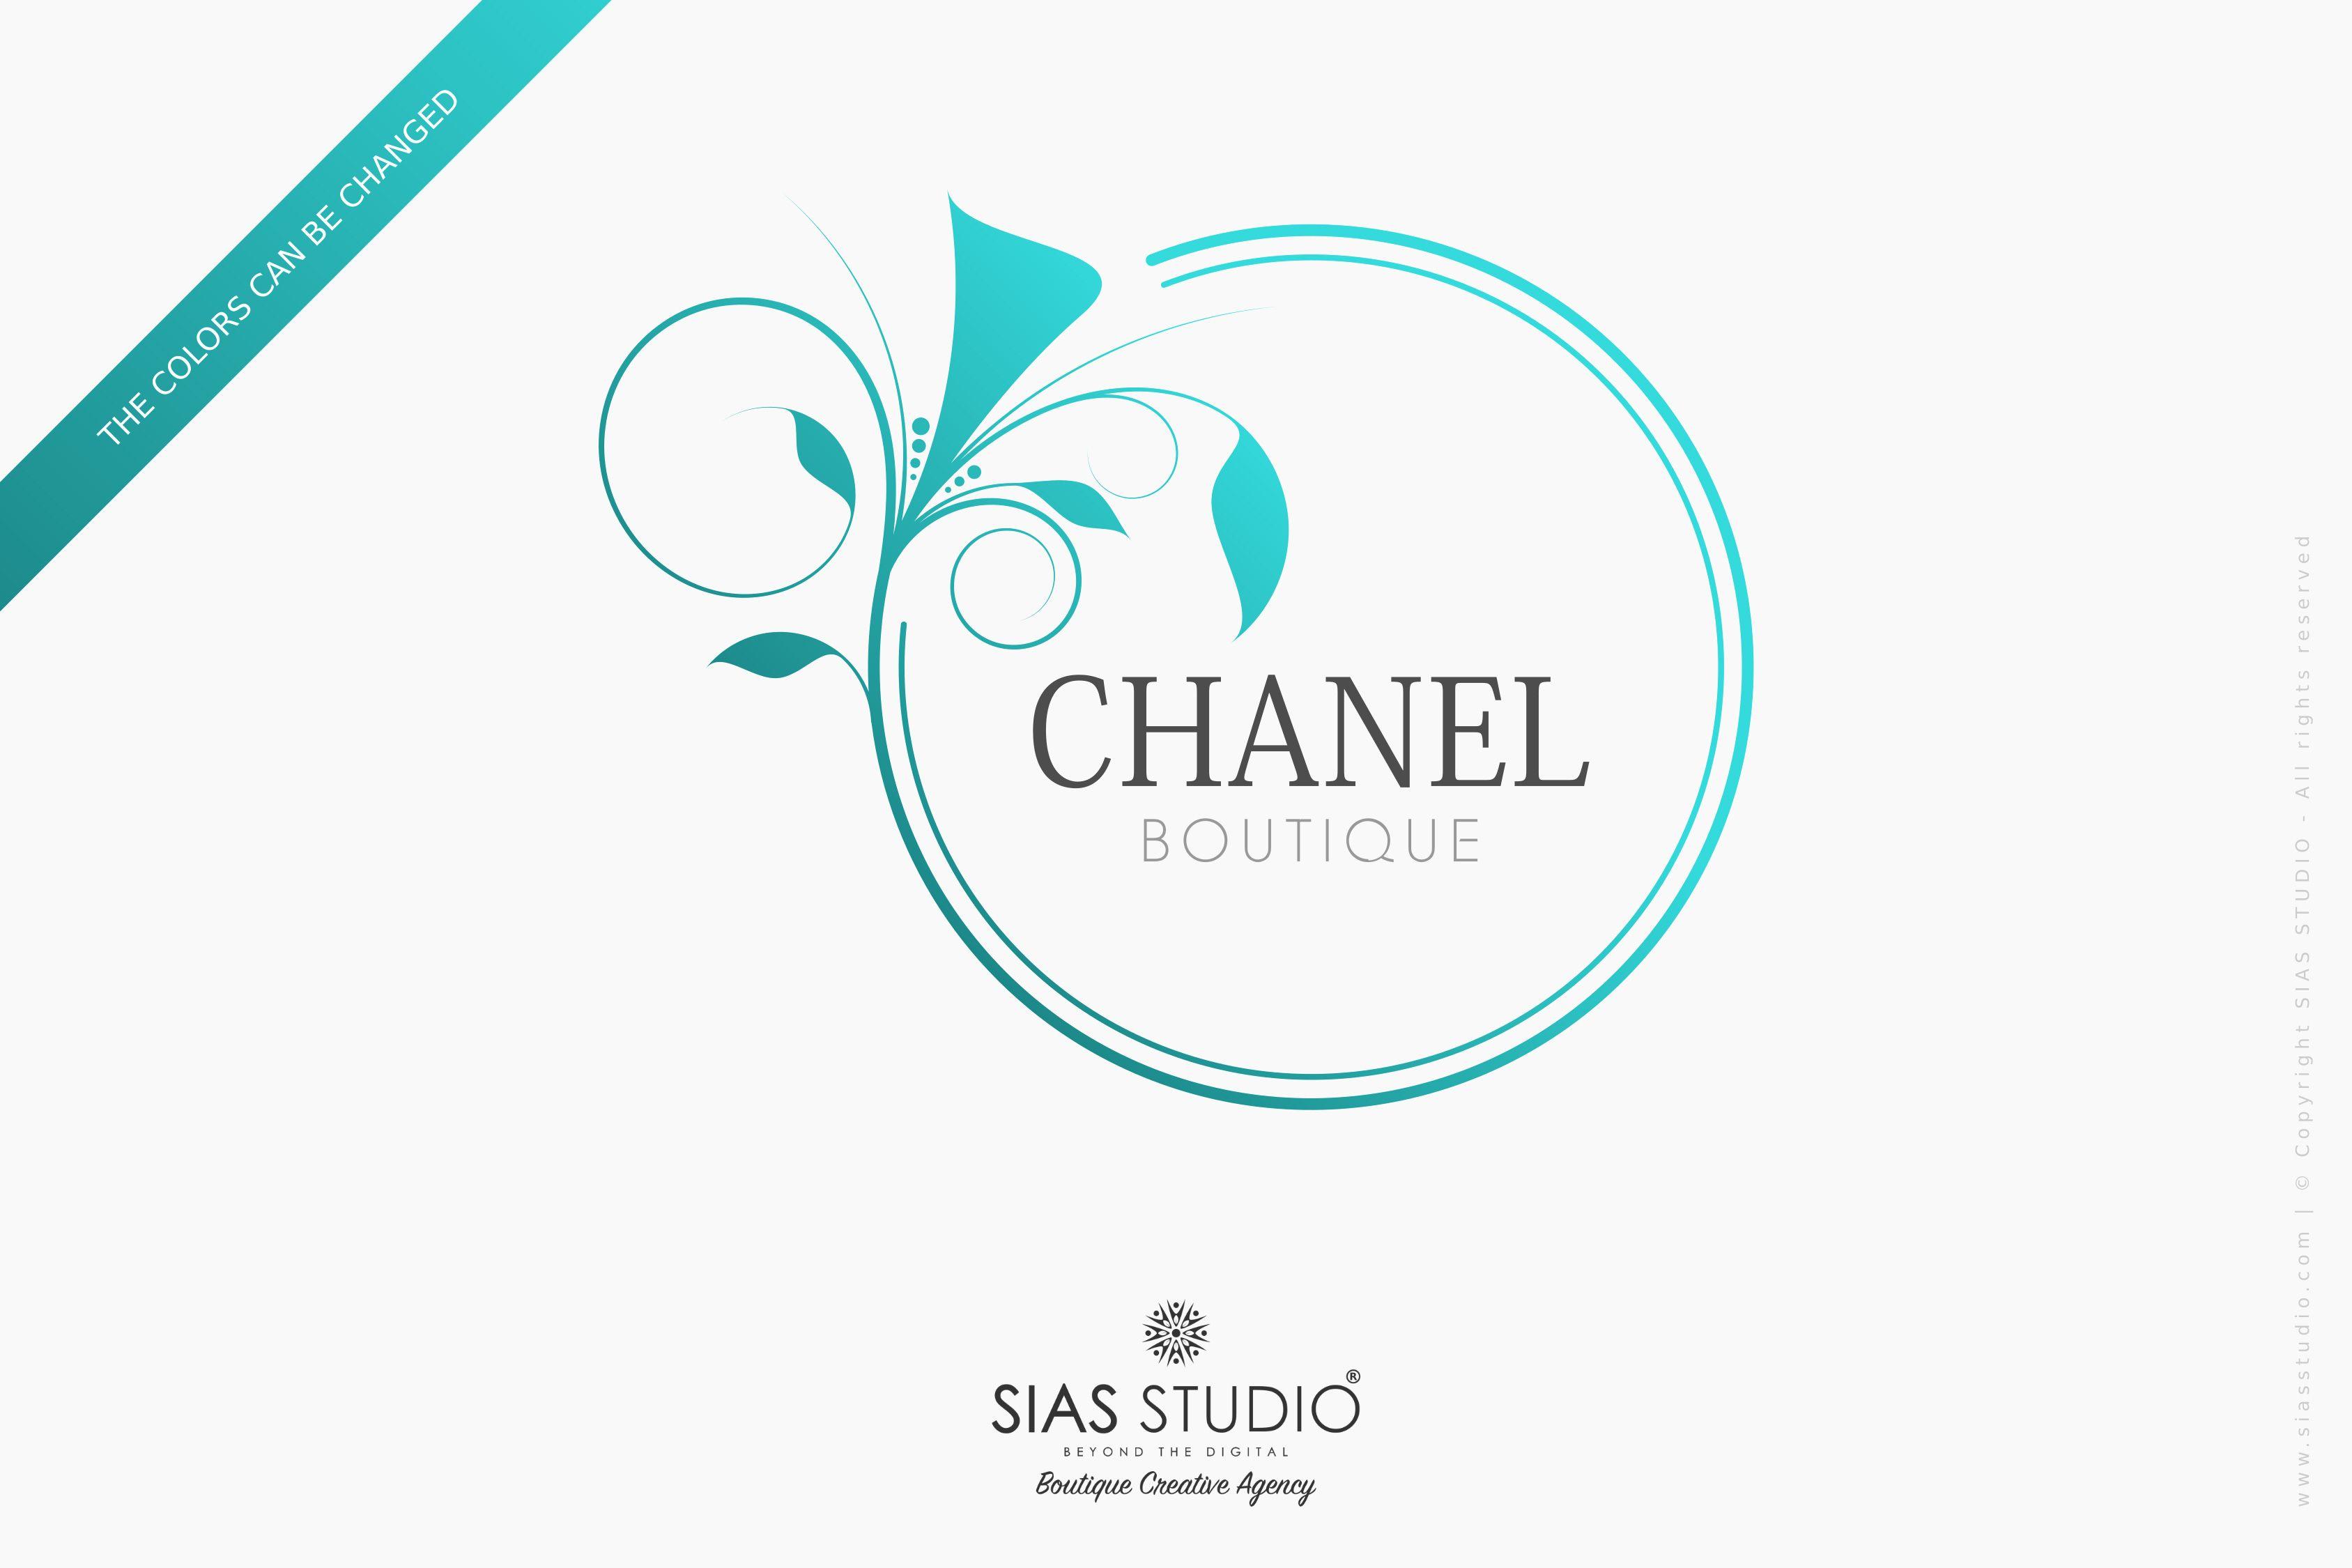 Chanel Floral Logo - Branding package Chanel Floral design with frame. Sias Studio